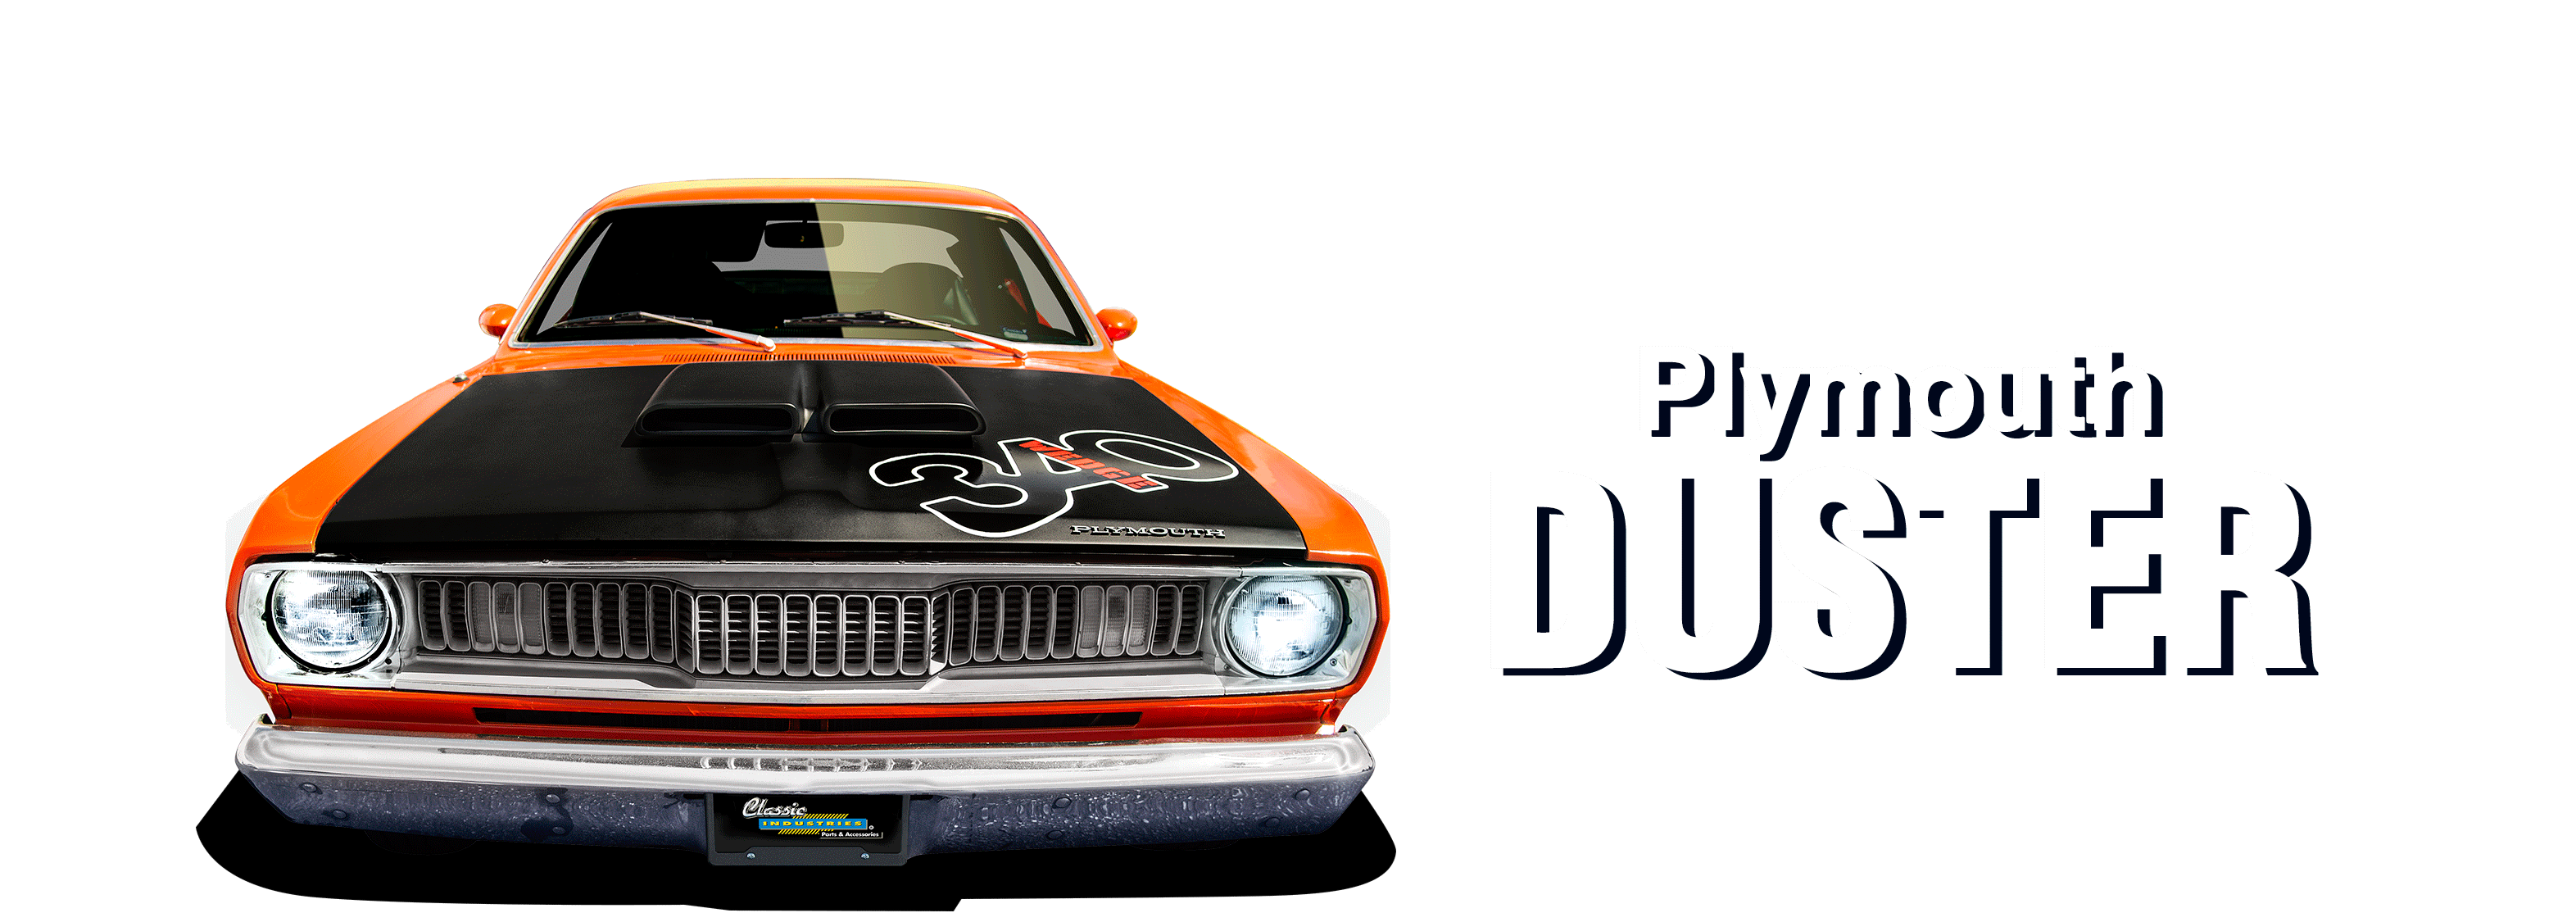 Plymouth-Duster-vehicle-desktop-1